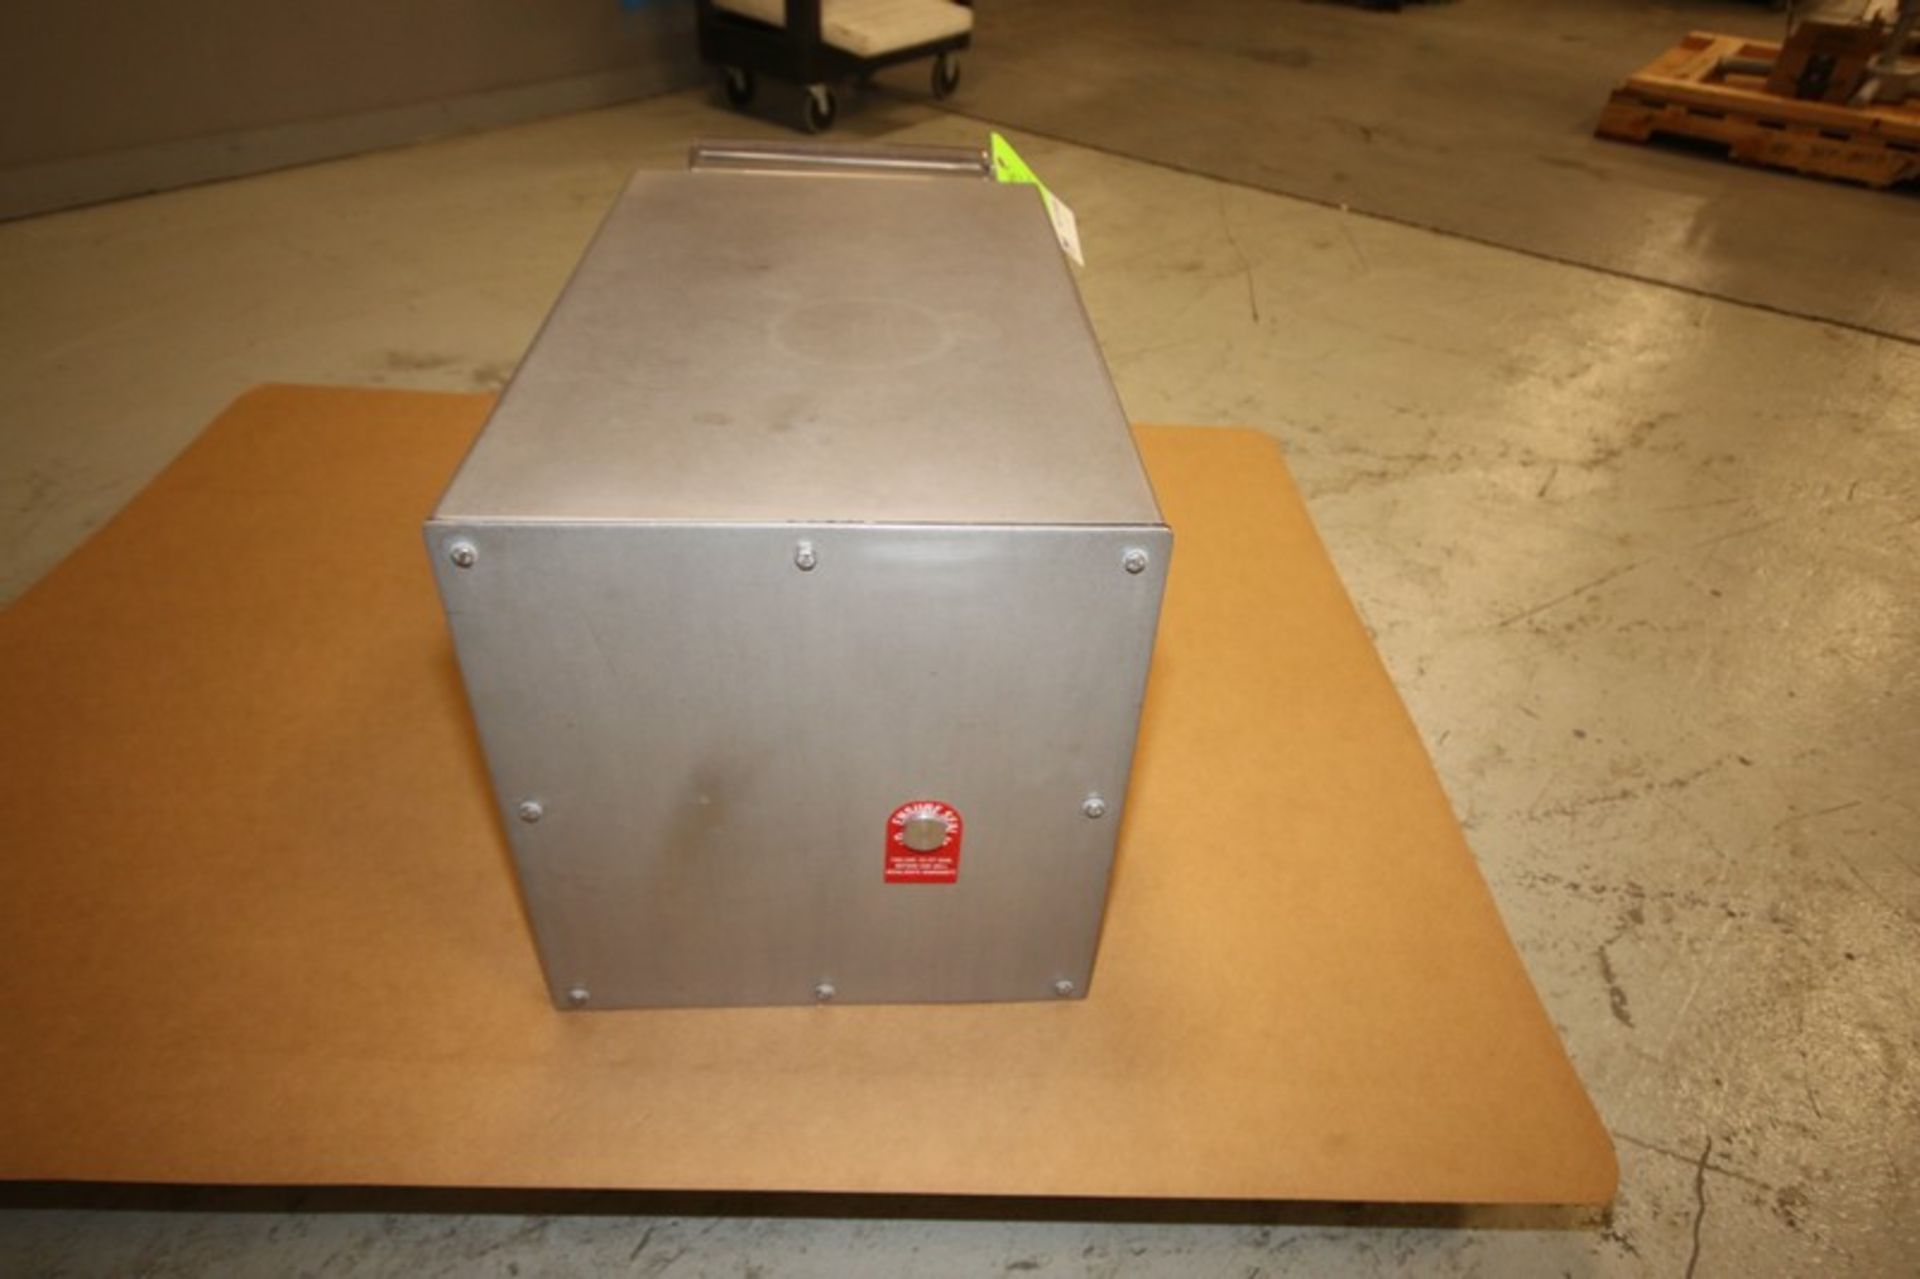 Loma S/S Metal Detector Head, Model LOMA IQ2, SN KEMH12322, with 13" W x 8" H Product Opening, - Image 4 of 8